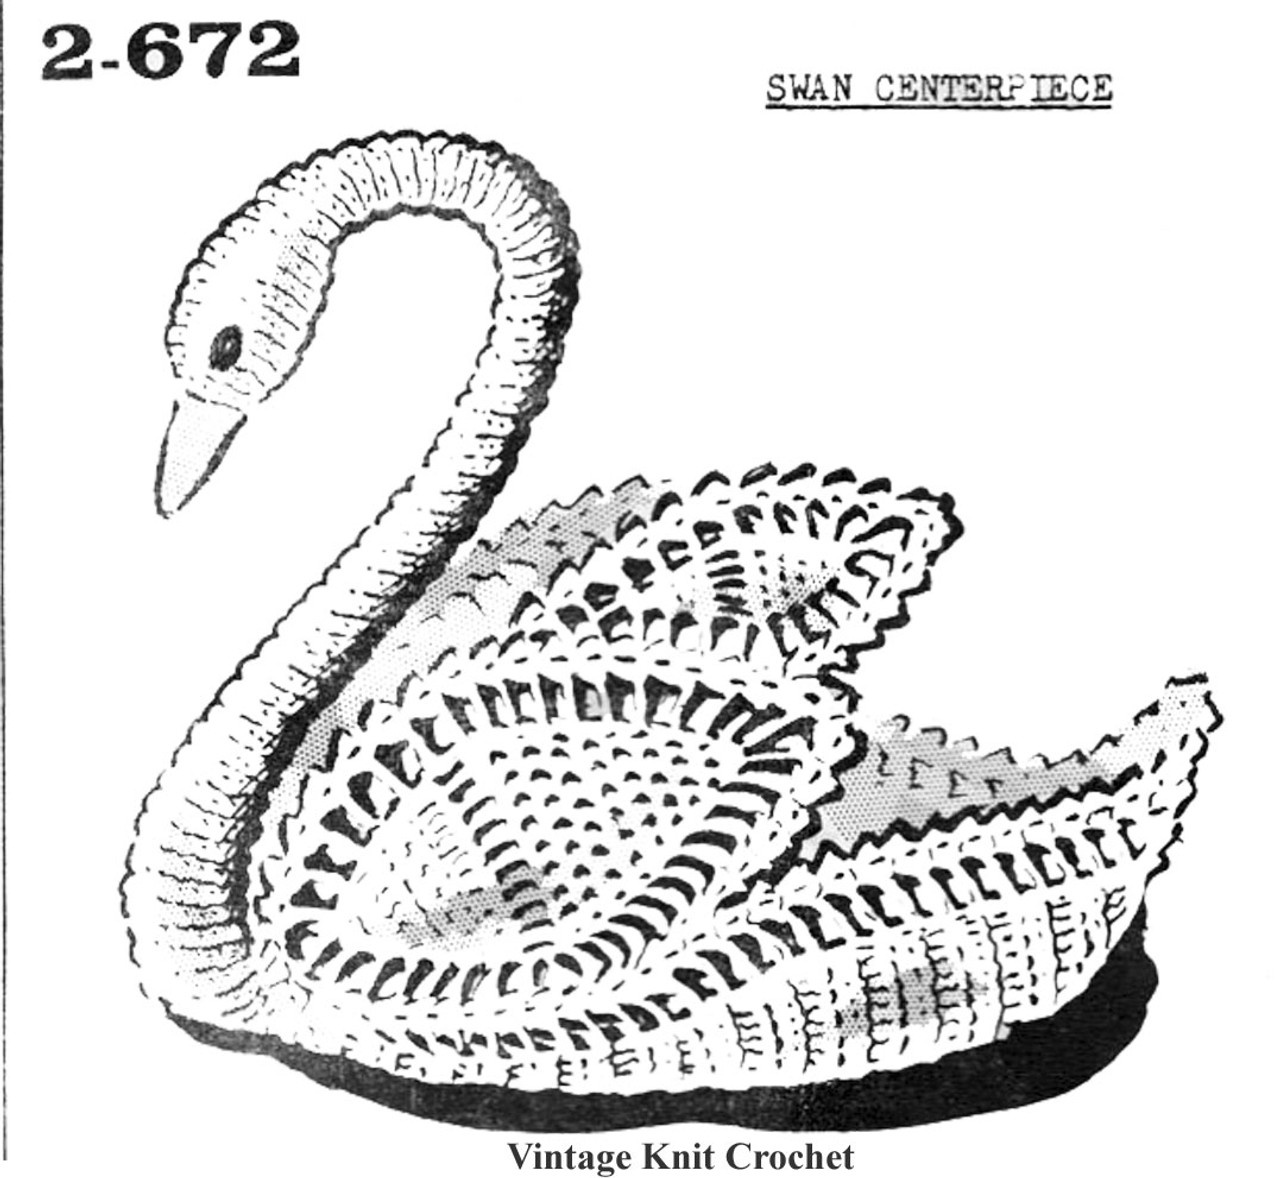 Crochet Swan Basket with Pineapple Wings, Anne Cabot 2672